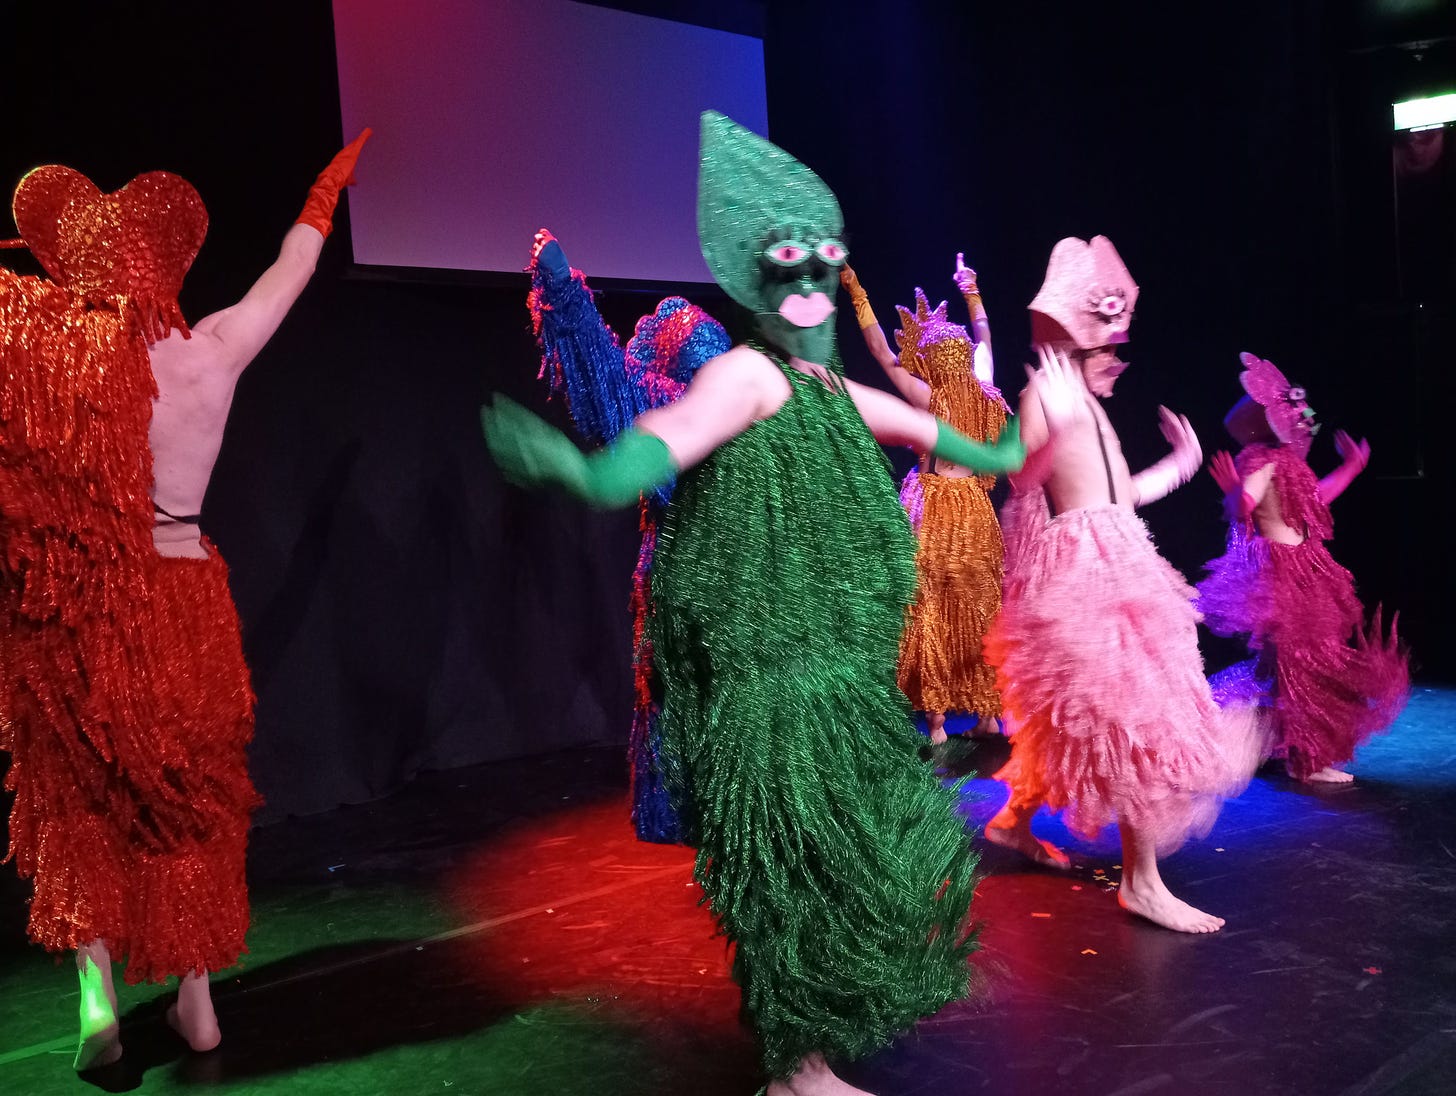 An image of 6 drag performers in matching costumes, each a different colour (red, green, pink, blue, orange and purple). Sparkly and cartoon-like.